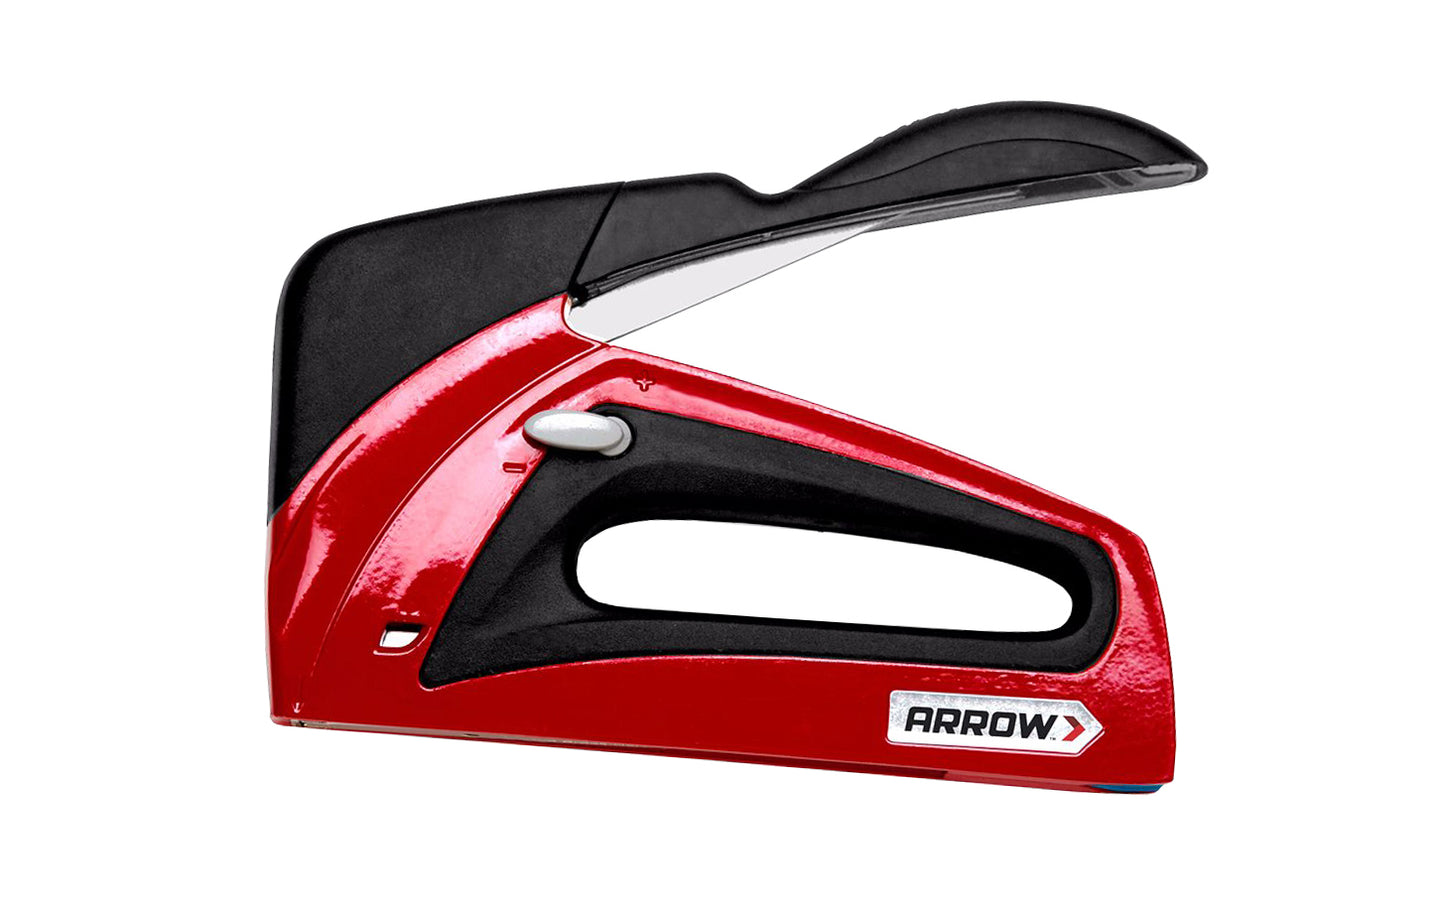 Arrow T50R.E.D. Professional Staple Gun & Nailer is great for general repairs, professional uses, upholstery, insulation, light trim. High/low power switch adjusts drive force to drive staples & brads into hard & soft surfaces. Use Arrow T50 Staples & Arrow 18GA Brad Nails. Ergonomic soft rubber grip. 079055123903